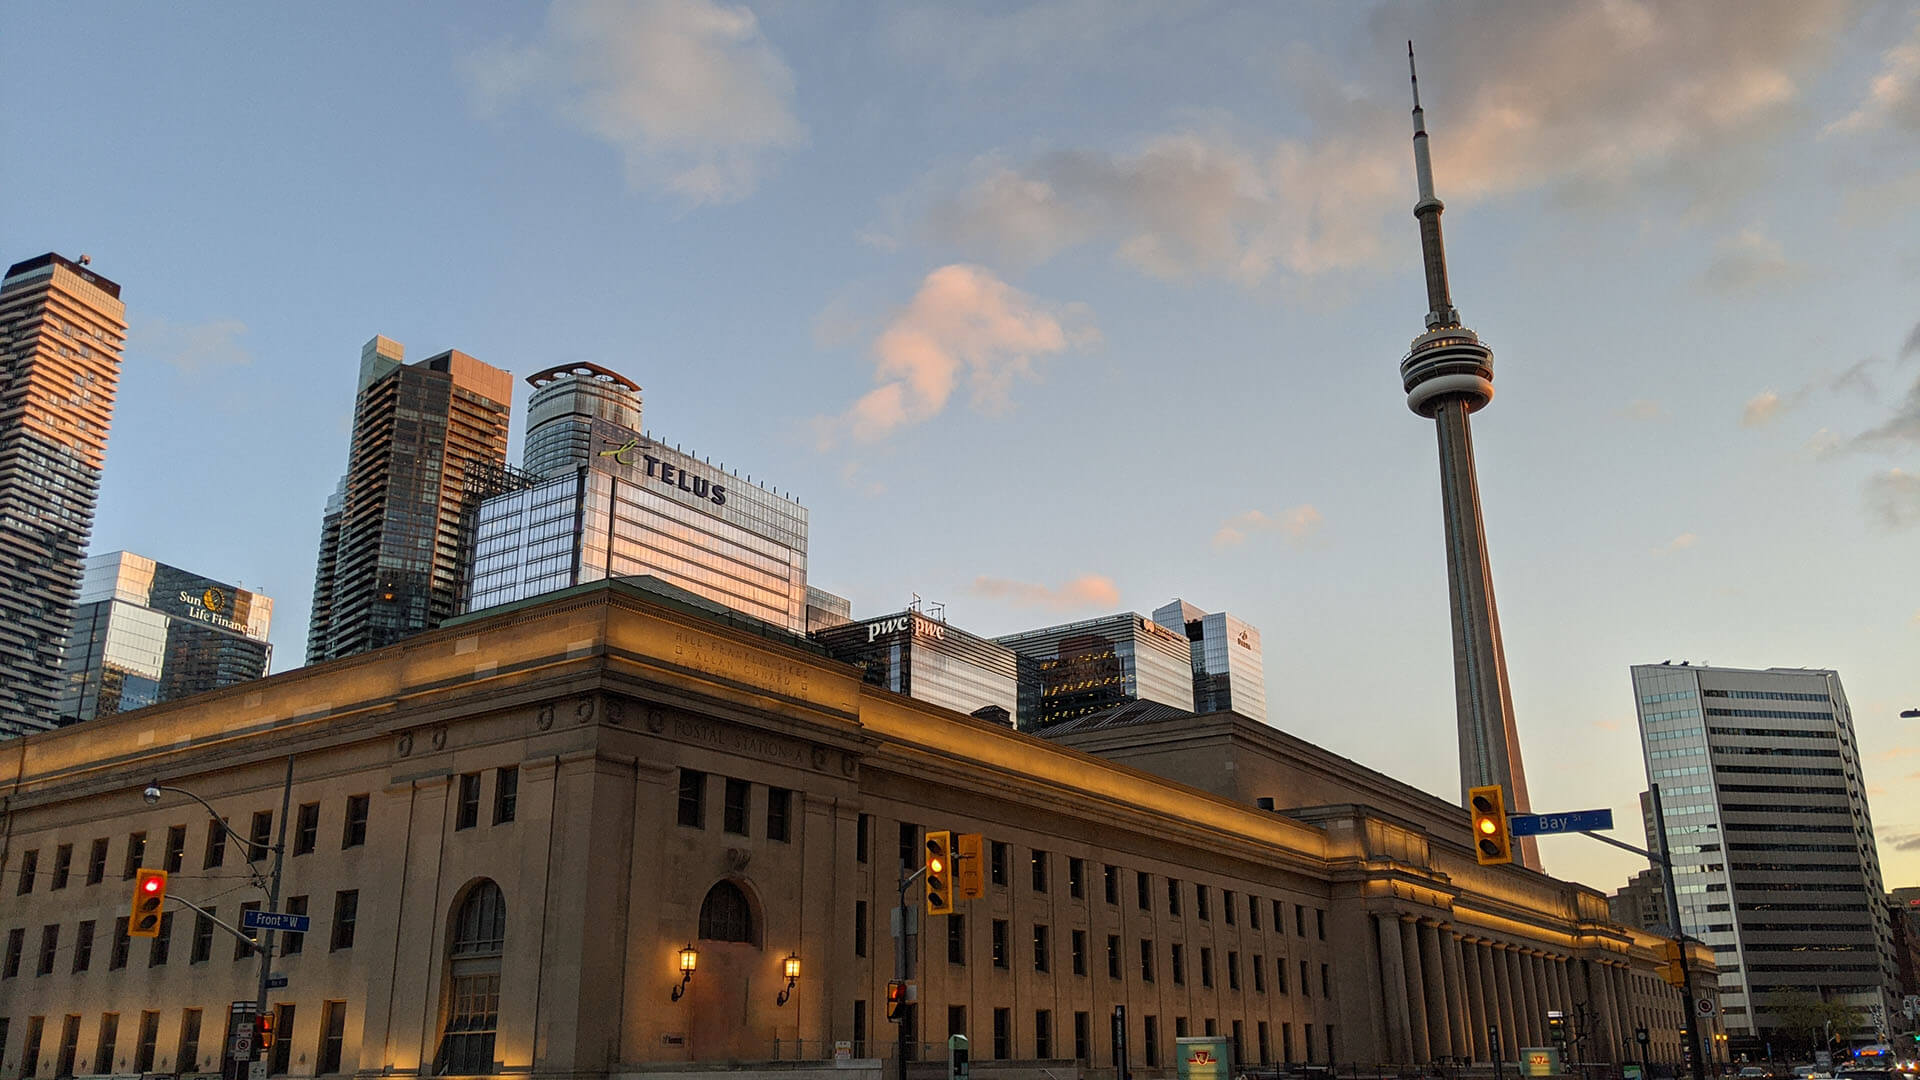 A photo of Union Station, the pwc building and the CN Tower with the Bay St. street sign